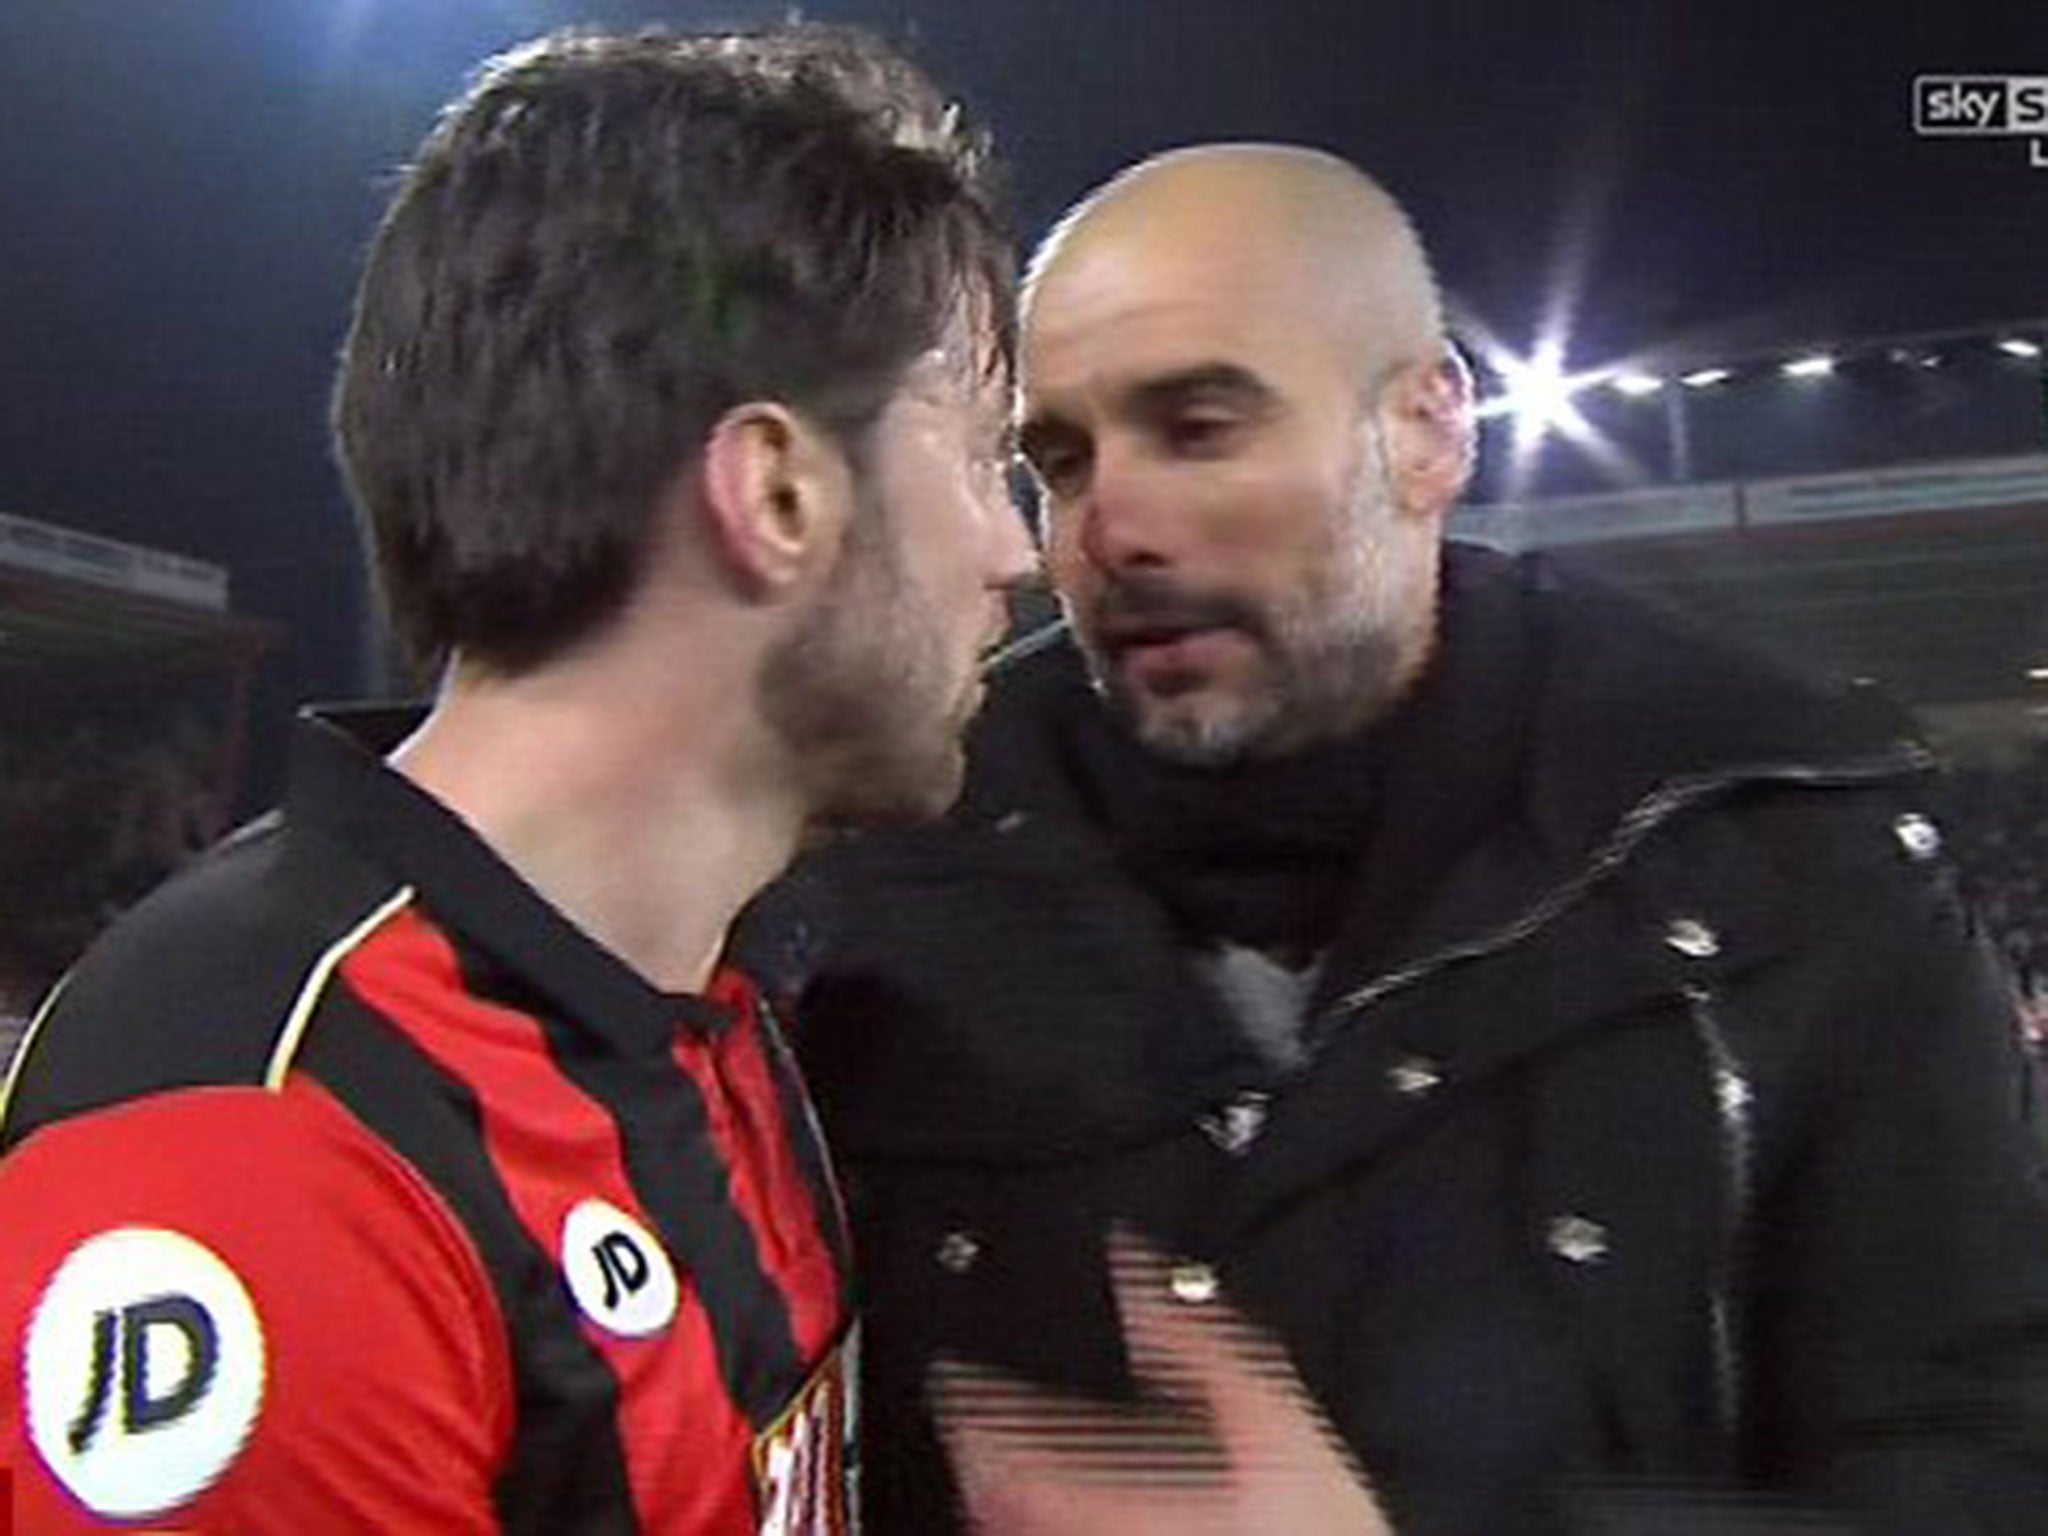 Pep Guardiola speaks with Harry Arter to send him his best ahead of the birth of his and his partner, Rachel, child birth